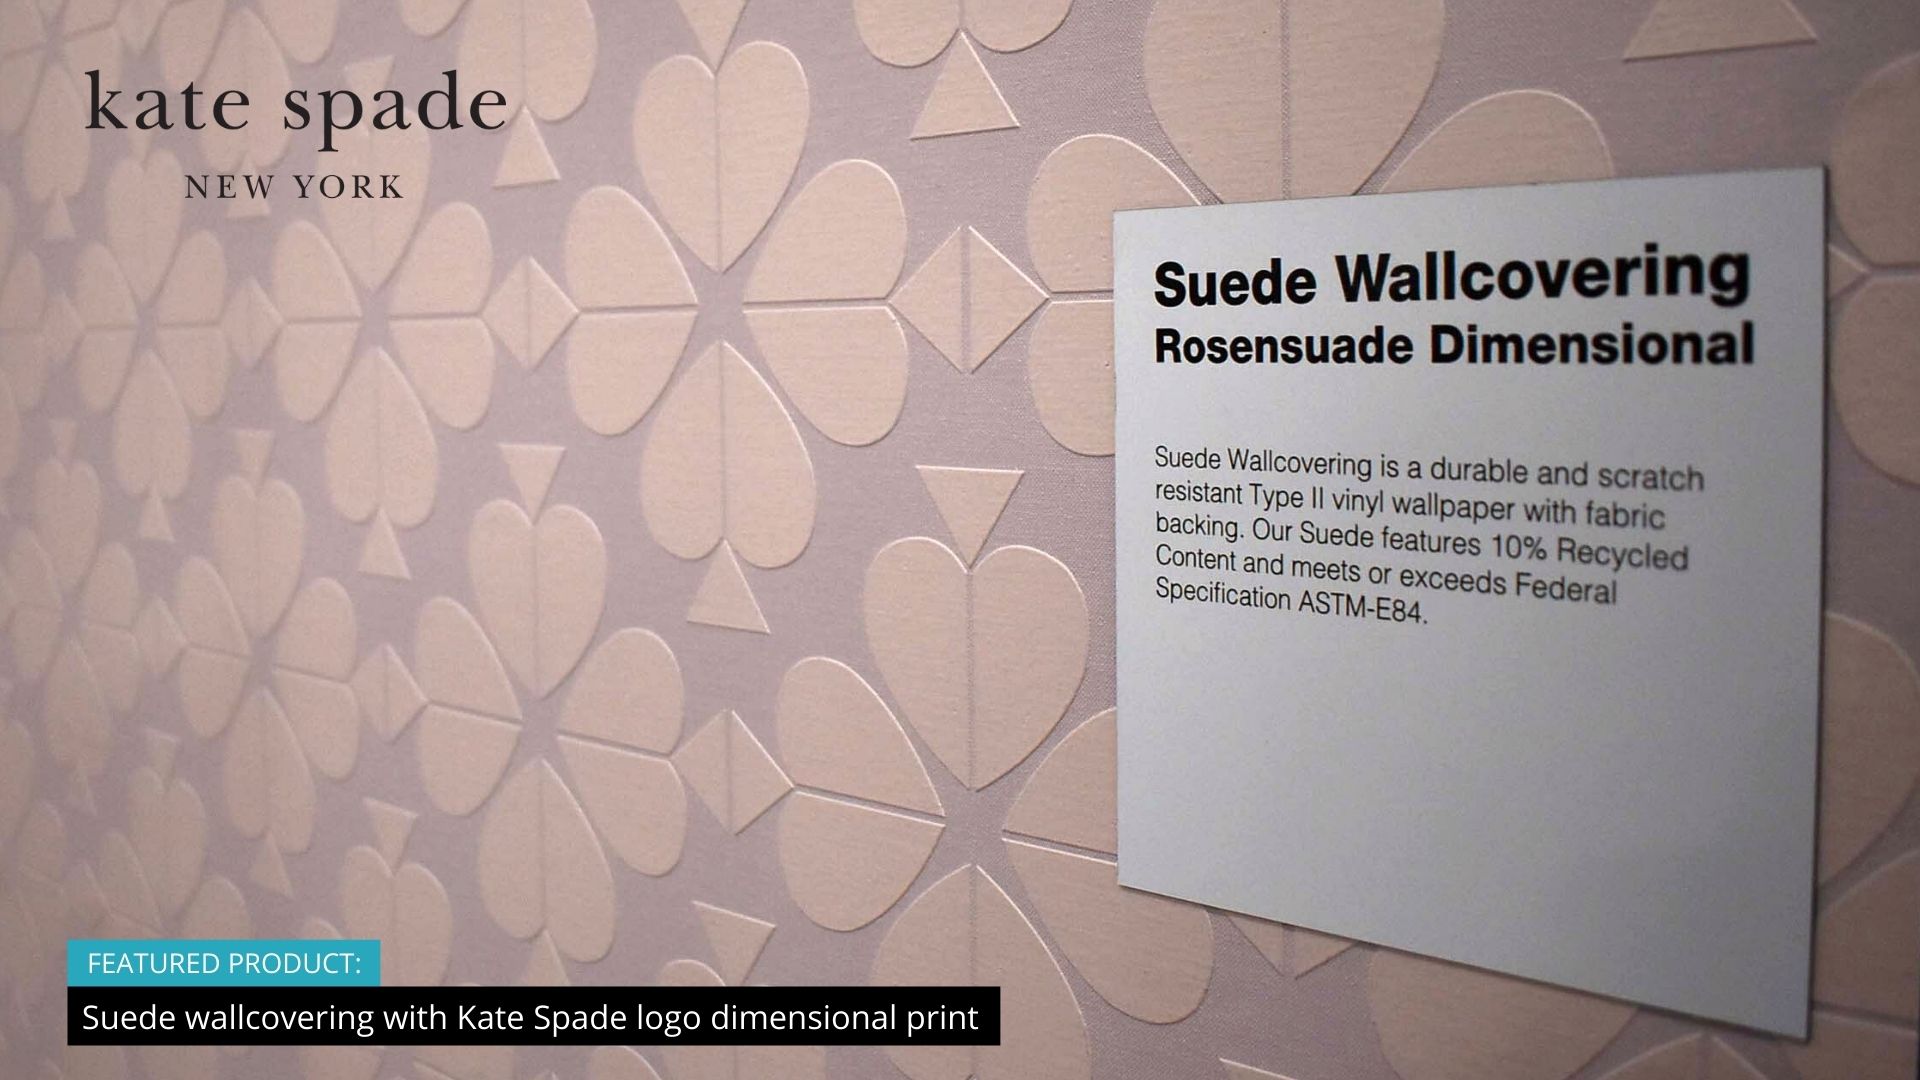 Photo of a closeup of pale pink suede textured wallpaper made up of a seamless pattern created from the Kate Spade logo